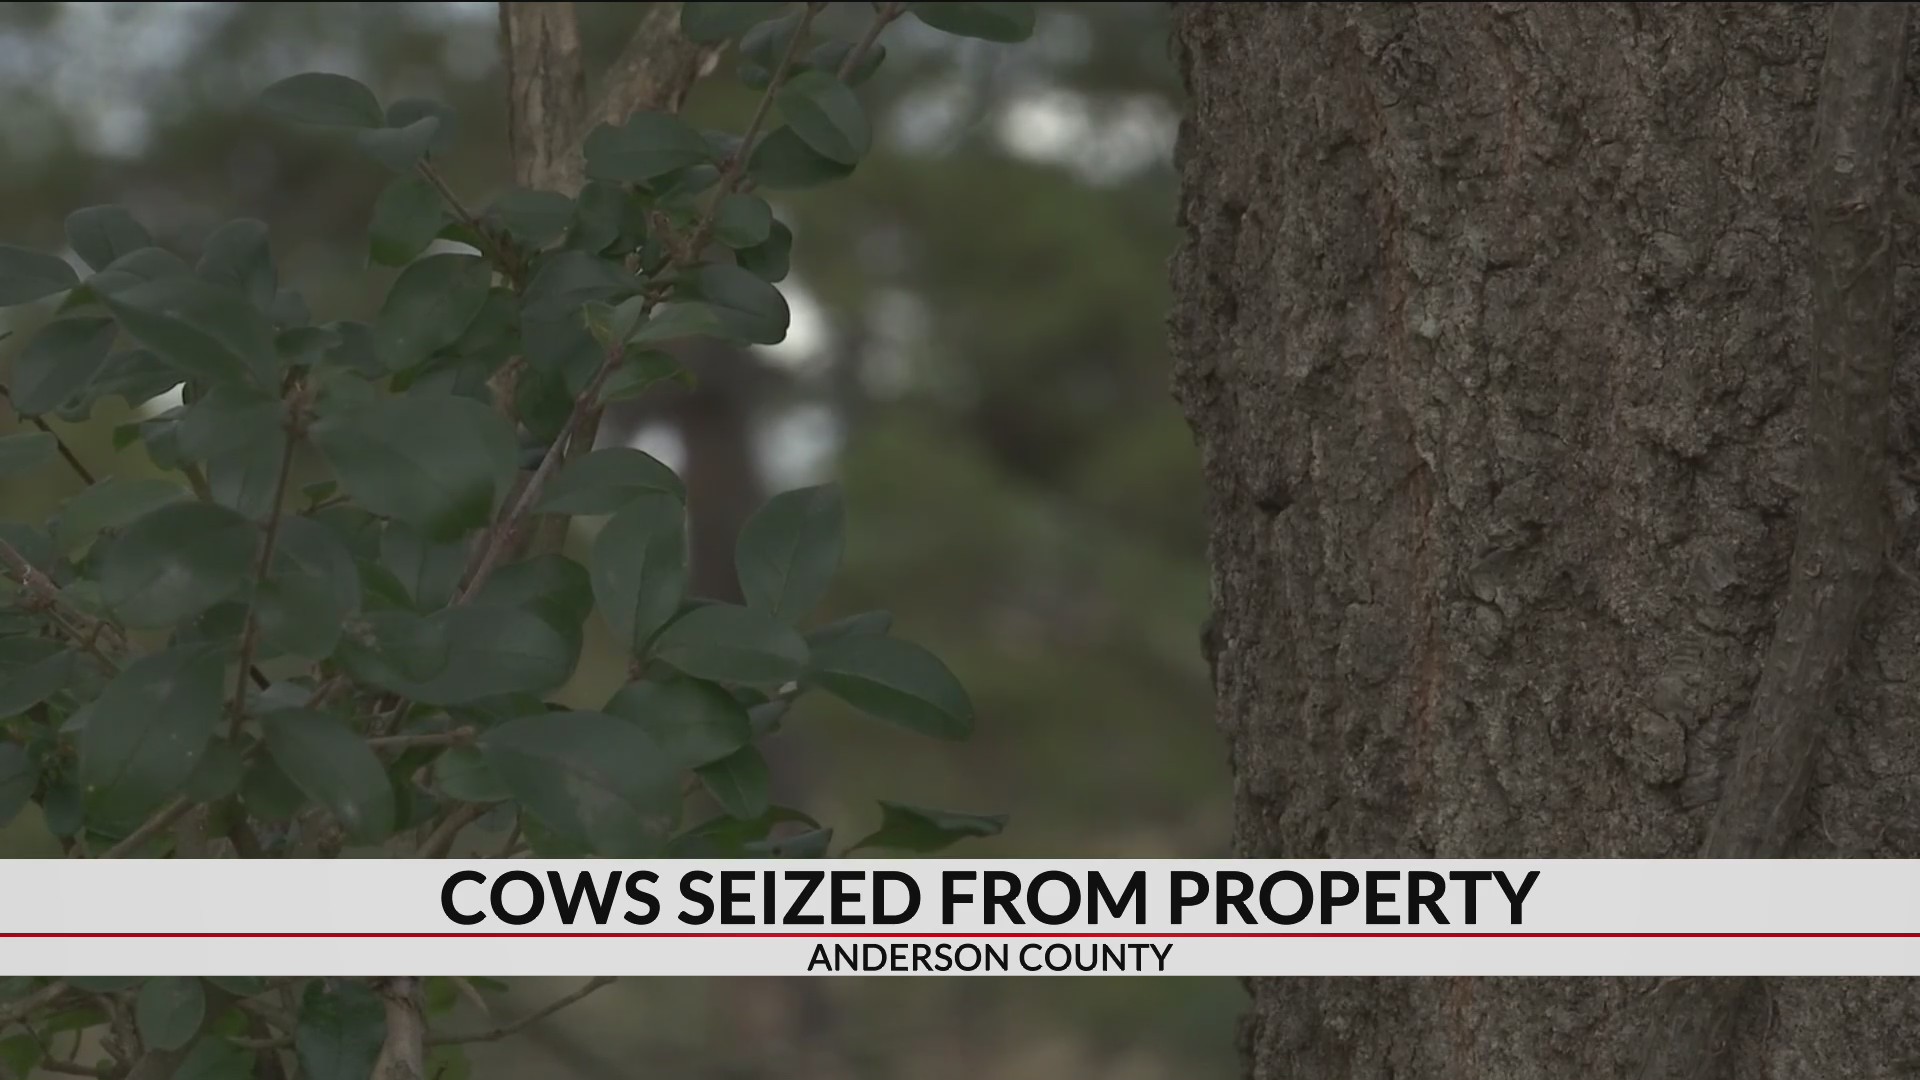 Thumbnail for the video titled "Animal lovers react to malnourished cows found in Anderson Co."